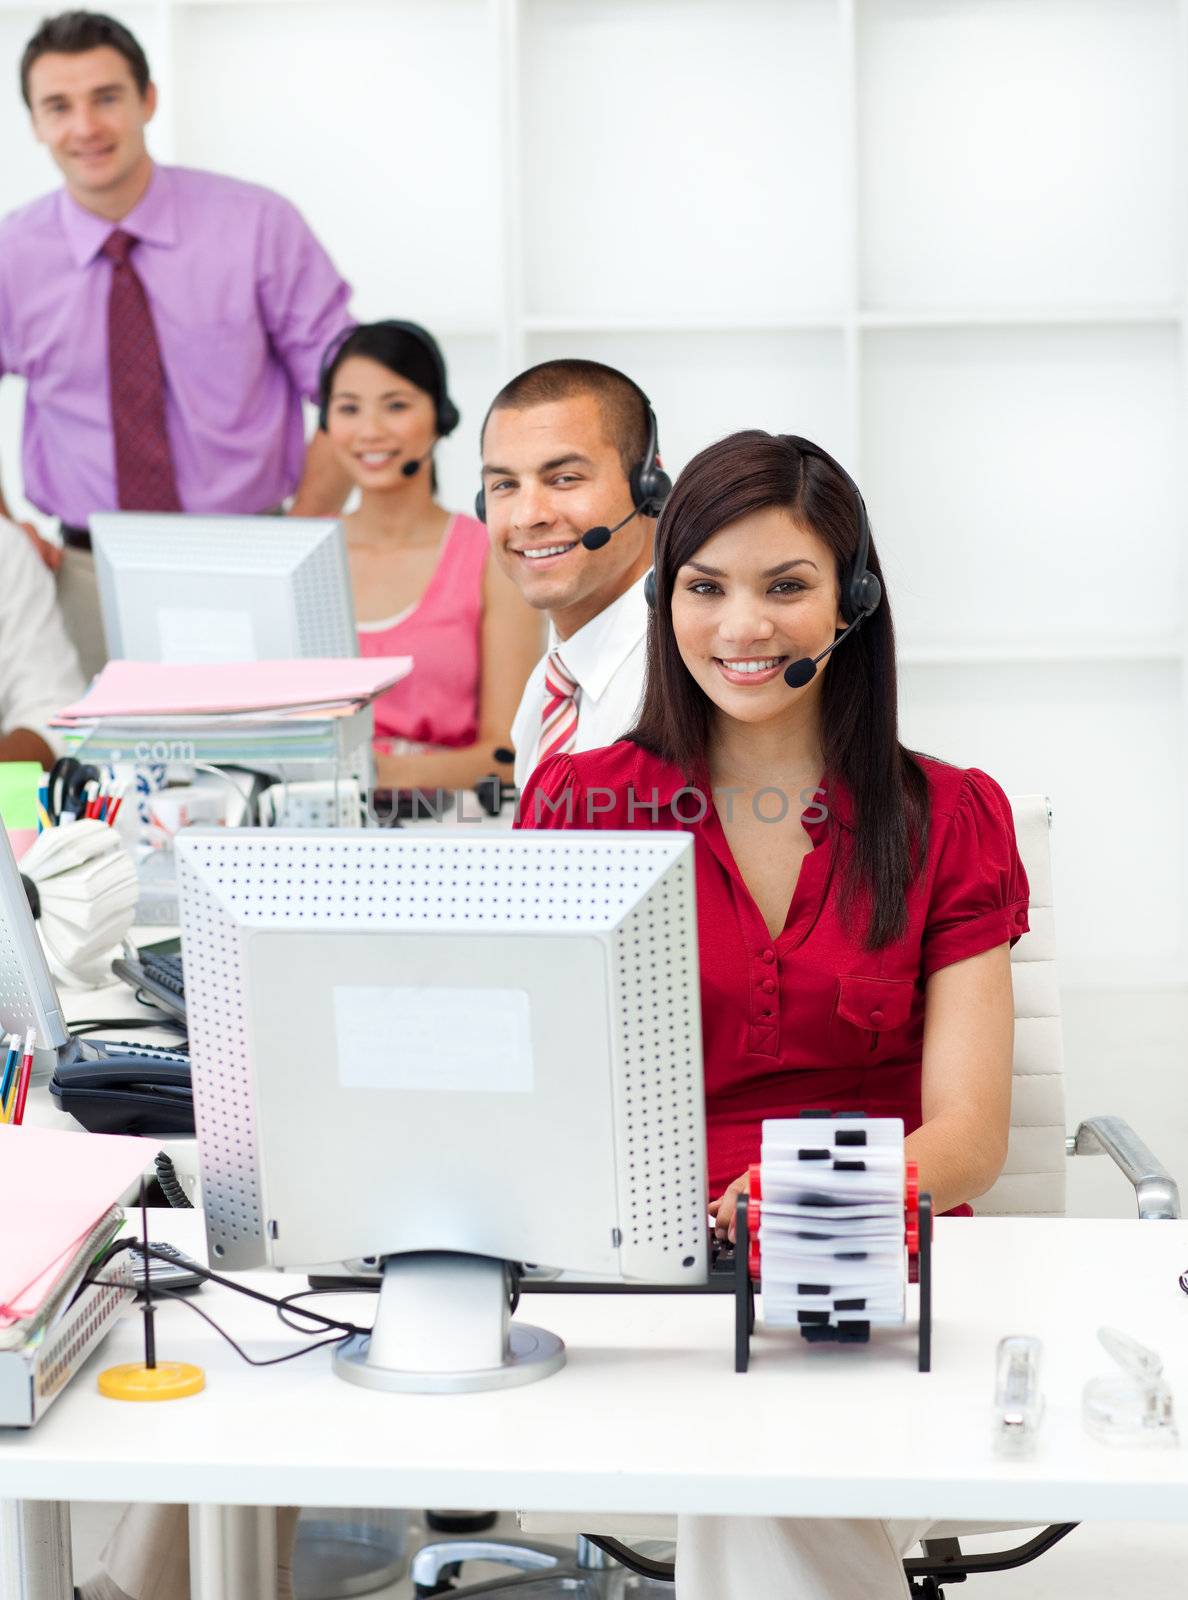 Smiling business people with headset on working in the office